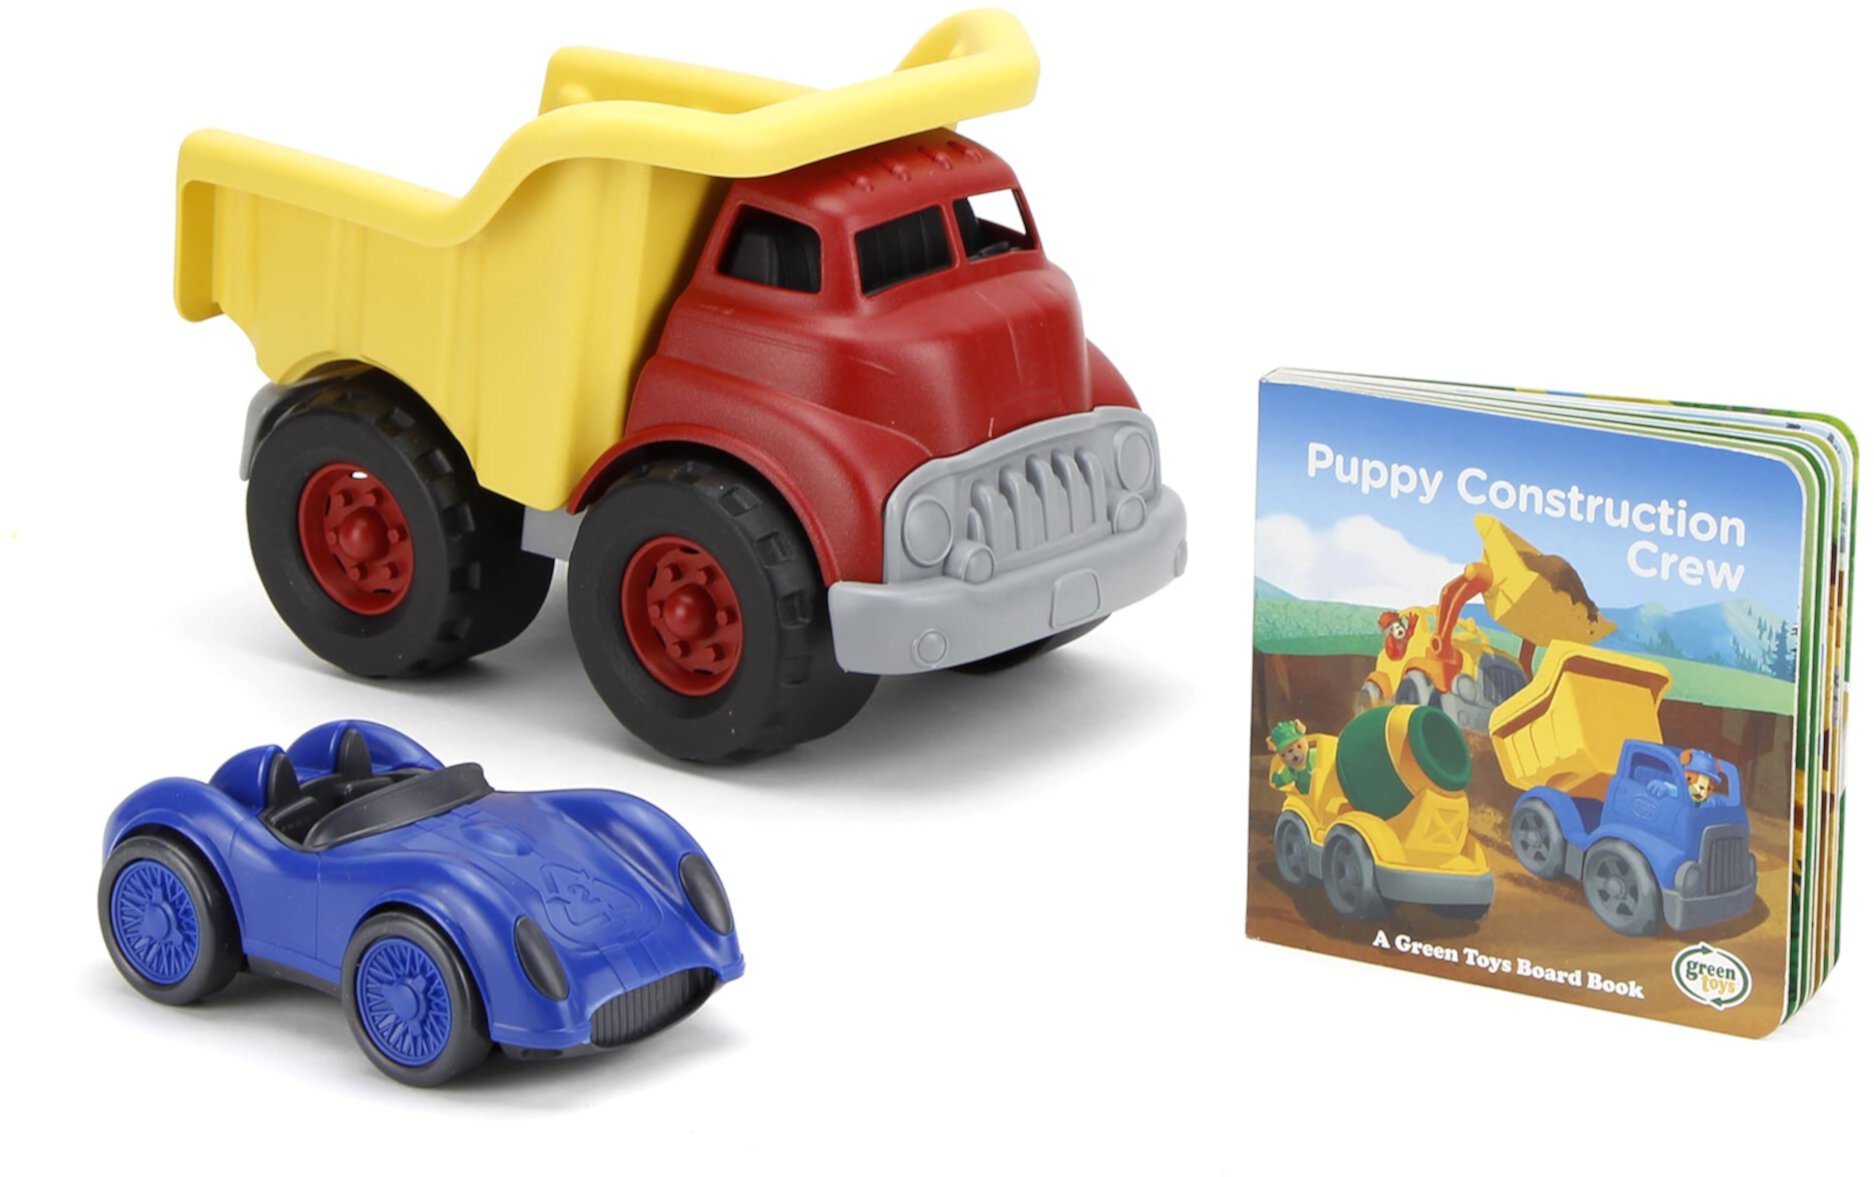 Green Toys Deluxe Dump Truck Set - 3 Piece Pretend Play, Motor Skills, Language & Reading Kids Toy Vehicle Set. No BPA, phthalates, PVC. Dishwasher Safe, Recycled Plastic, Made in USA. Green Toys